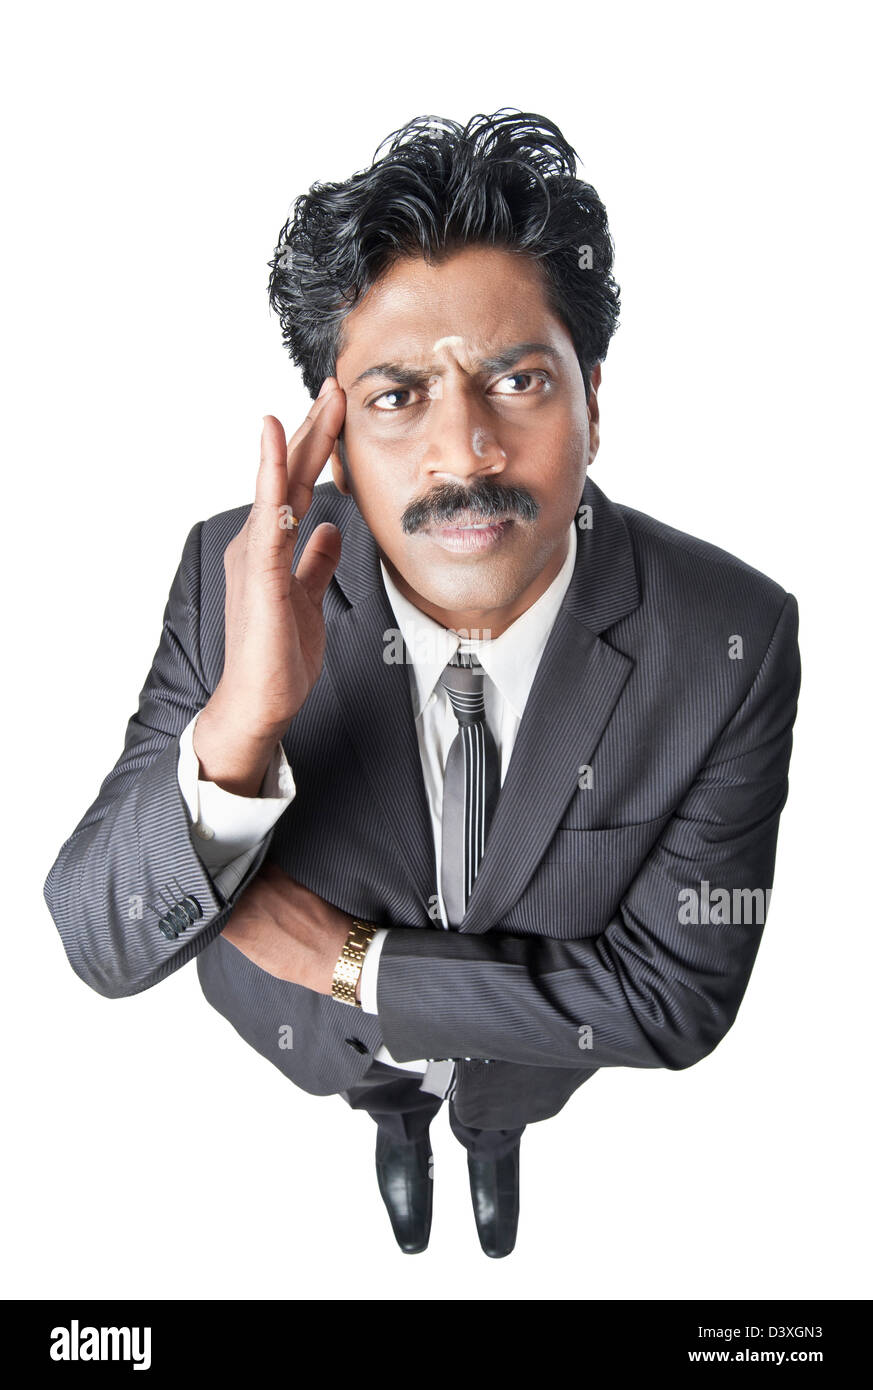 South Indian businessman gesturing and looking serious Stock Photo